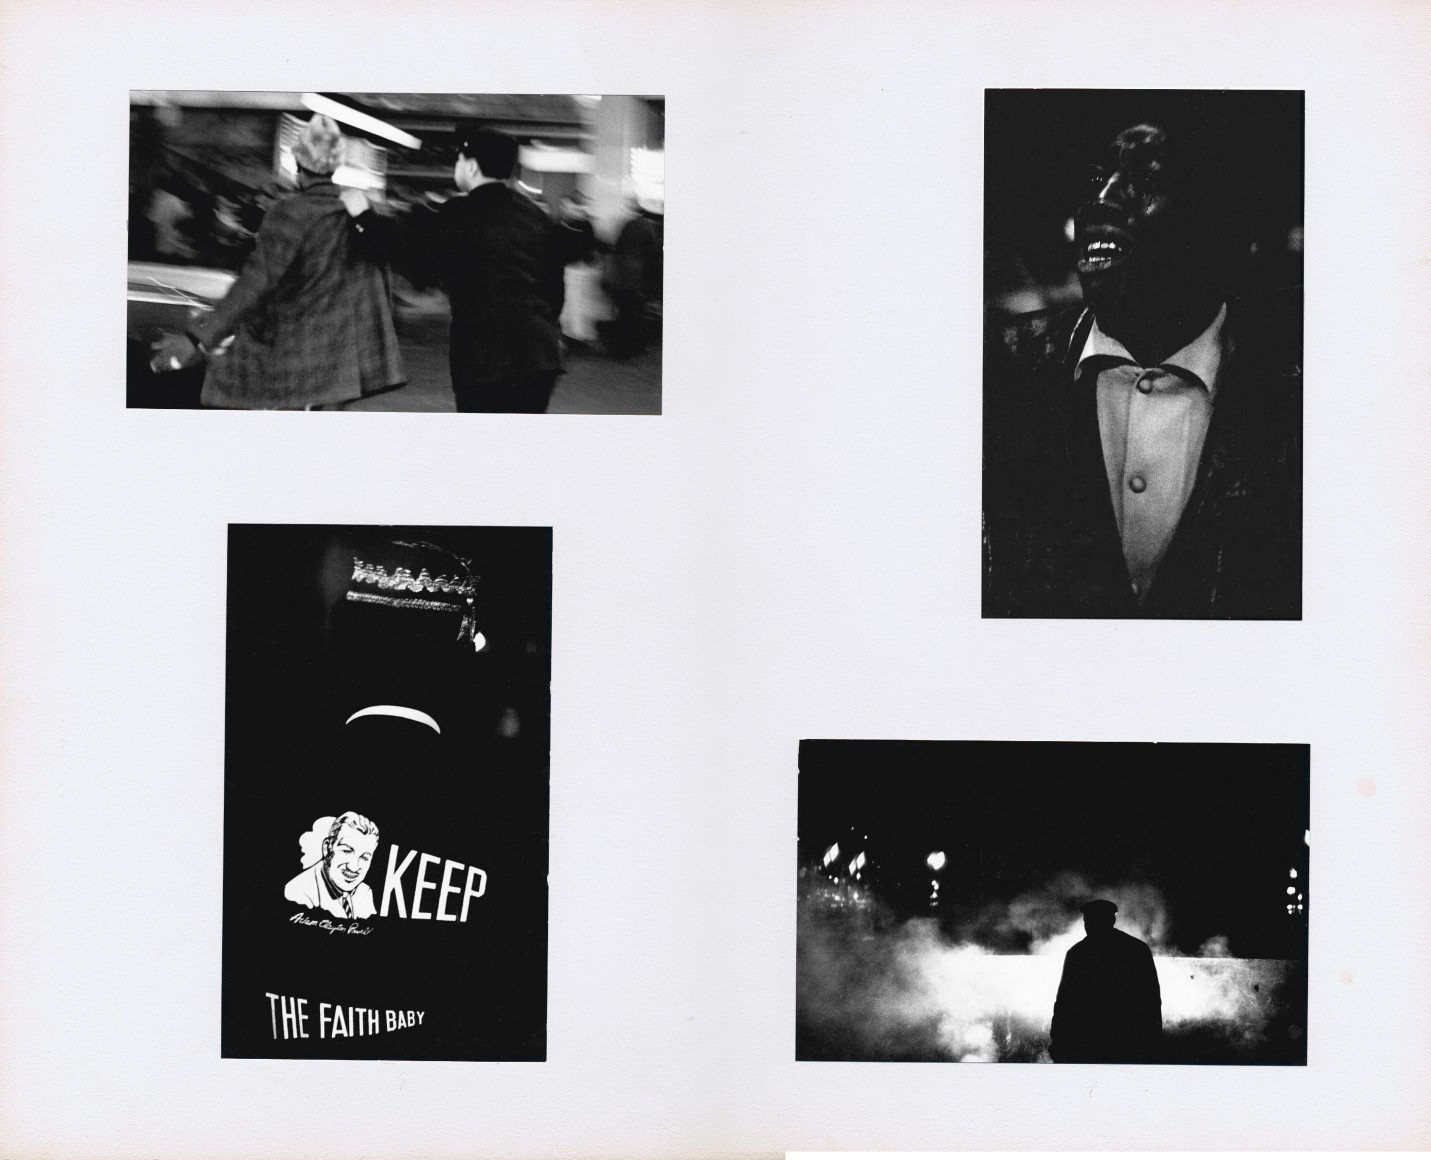 33. Beuford Smith, I Have a Dream: The Assassination of Martin Luther King, Jr., April 5, 1968. Four photographs mounted on white board. Features a man being arrested, a young man crying, a man wearing a jacket that reads &quot;Keep the faith, baby,&quot; and a figure silhouetted against clouds of smoke.